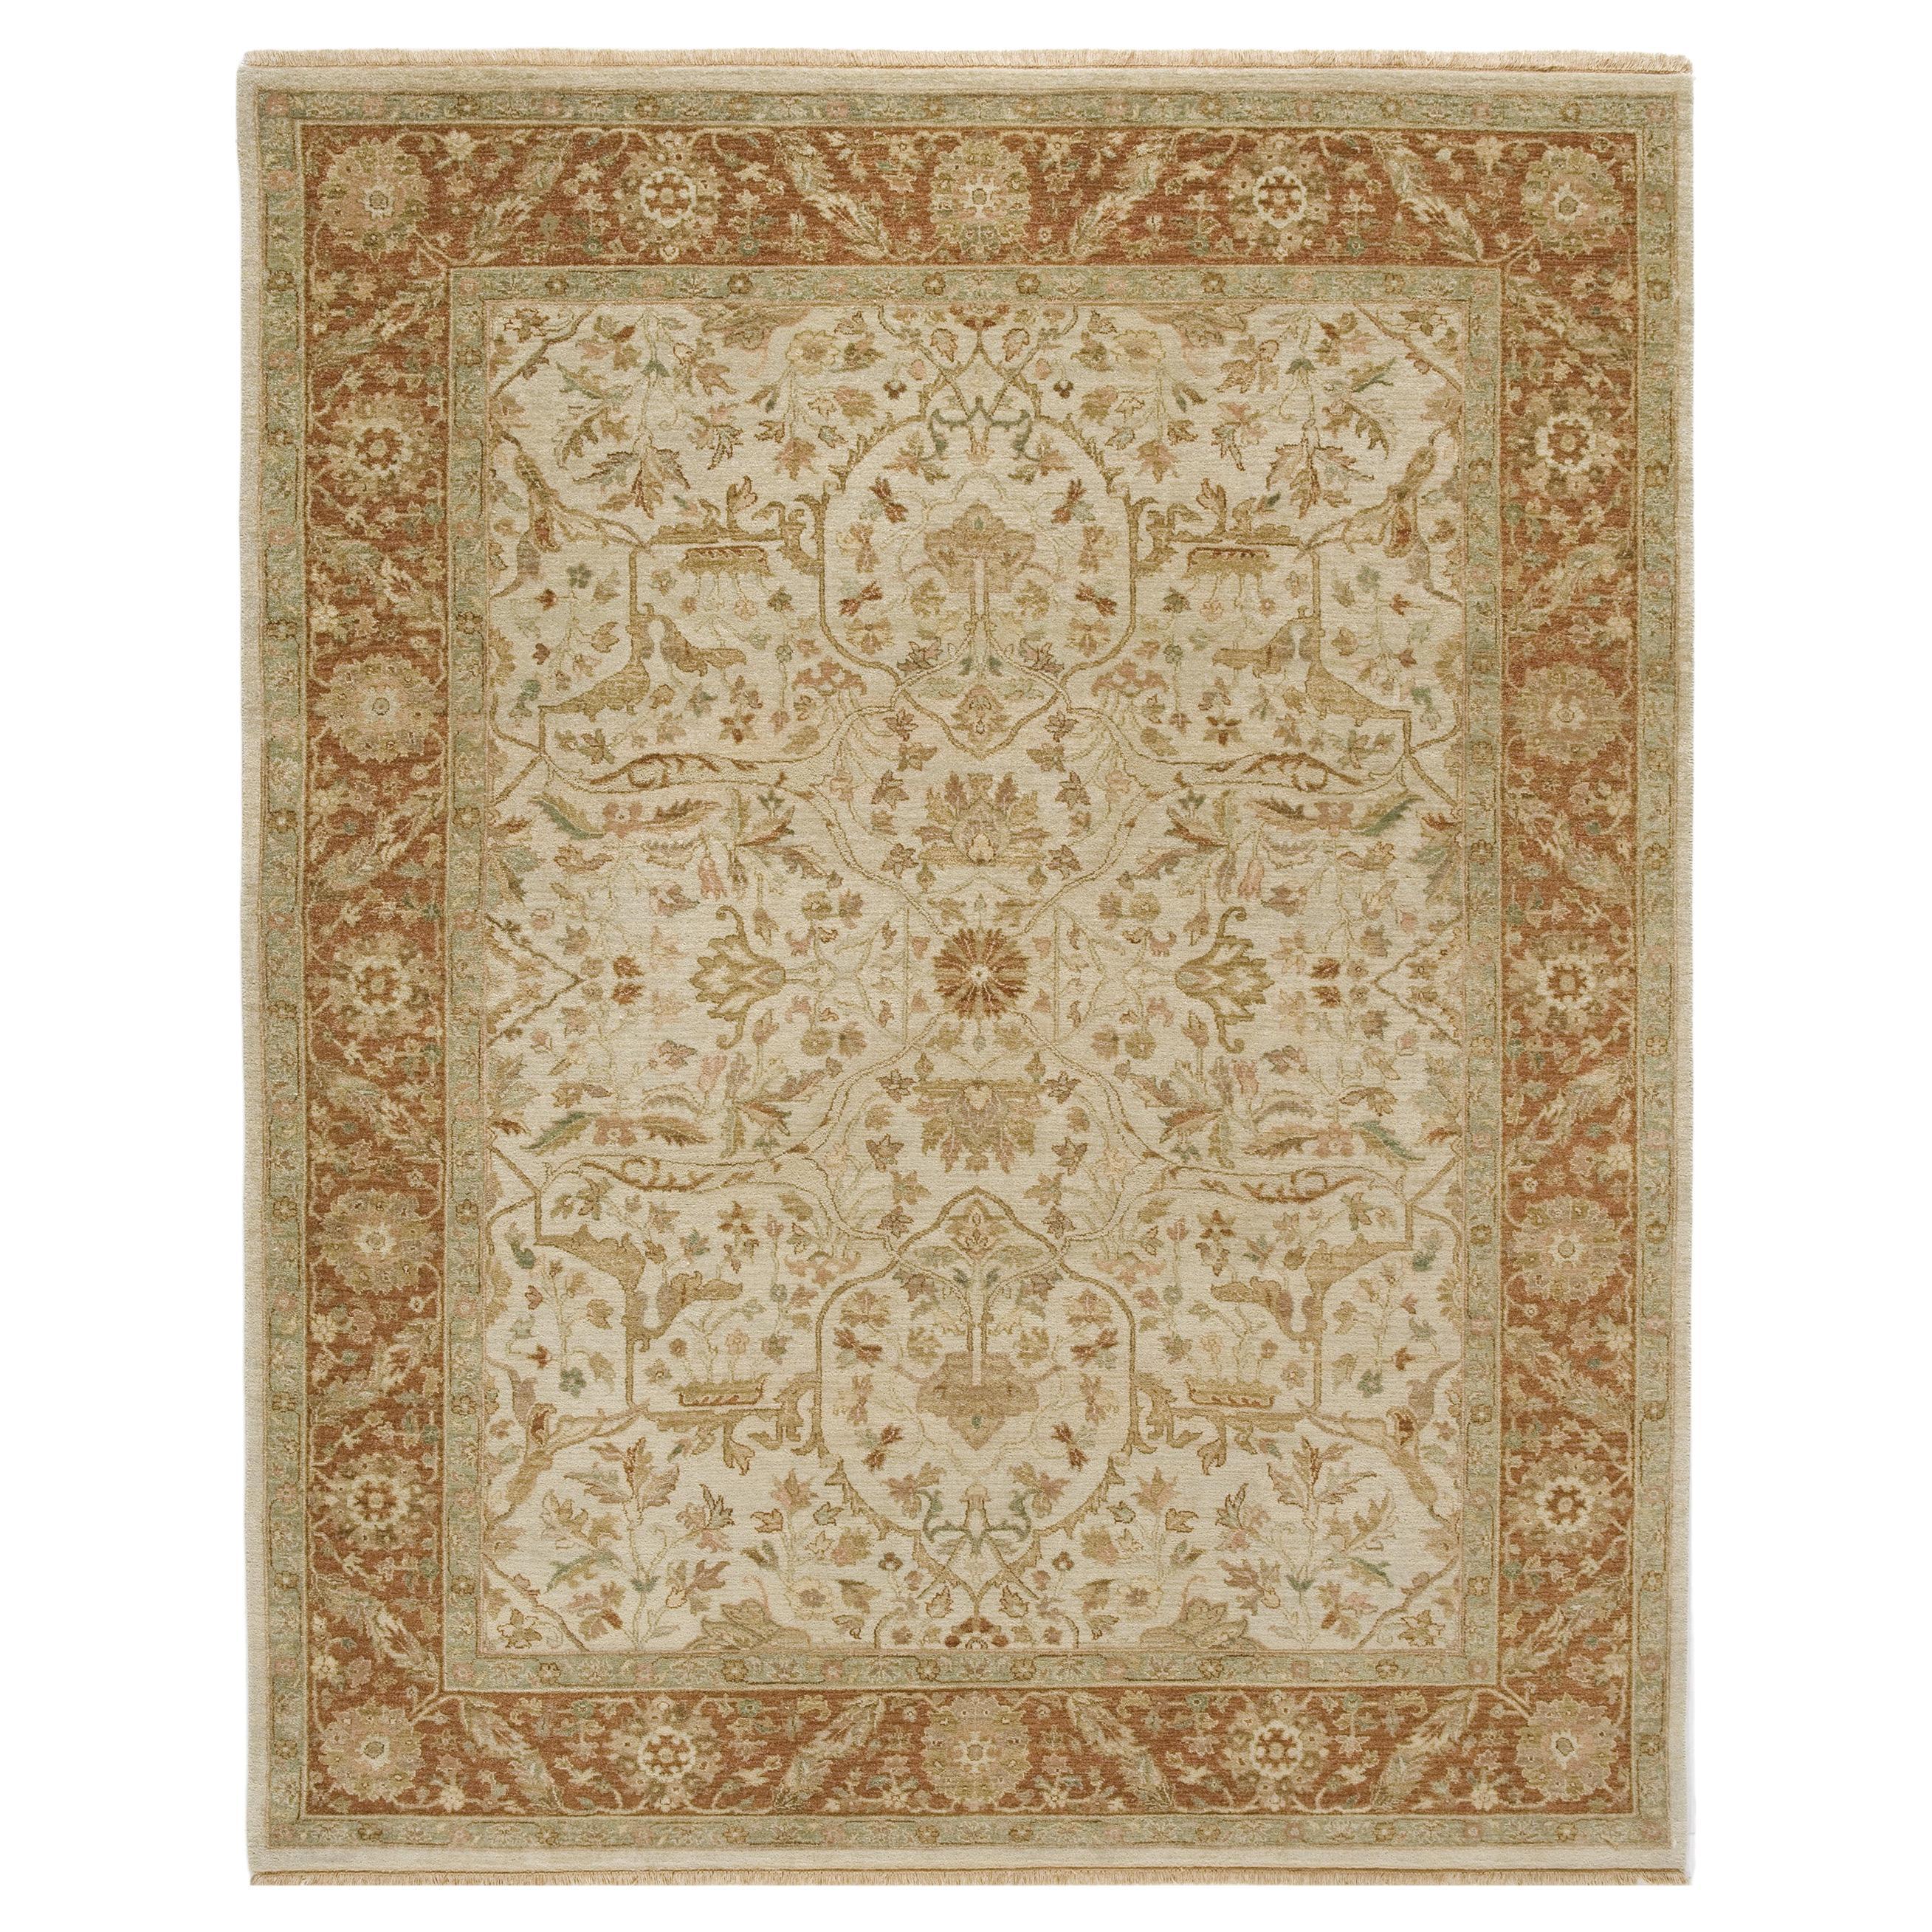 Luxury Traditional Hand-Knotted Ivory/ Bronze 12x24 Rug